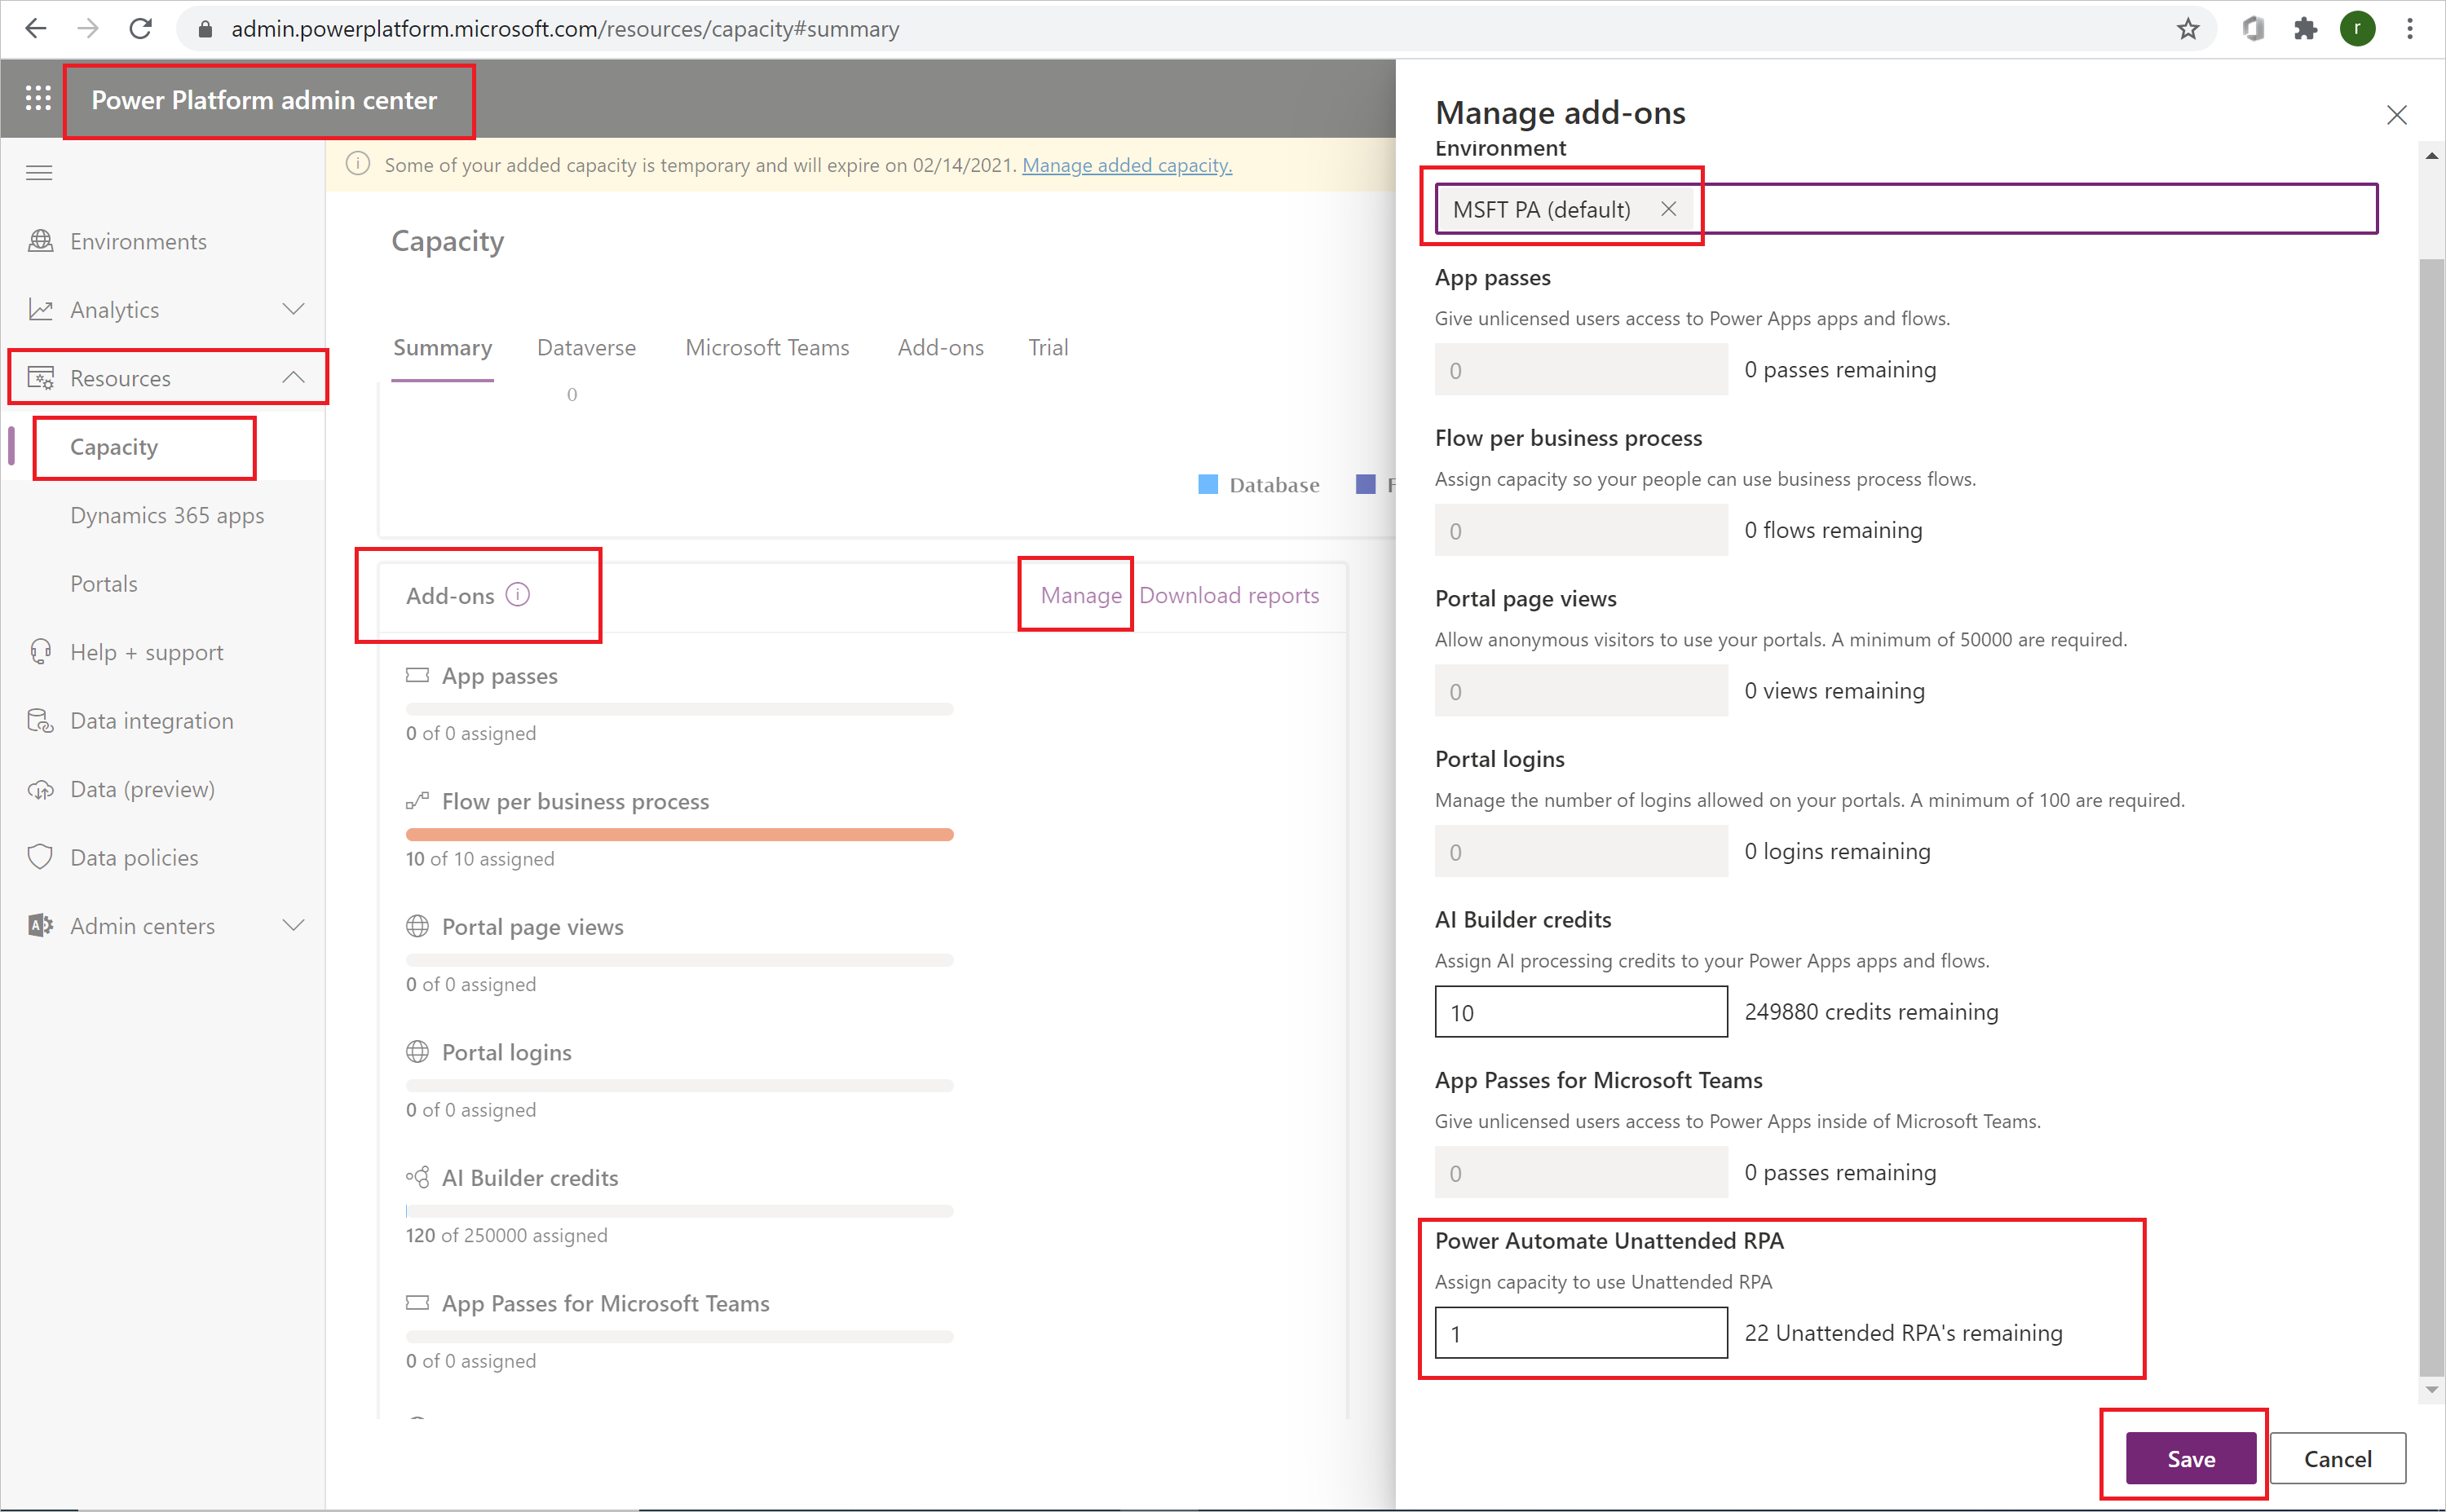 Screenshot of the Manage add-ons page in the Power Platform admin center, with highlighted fields.